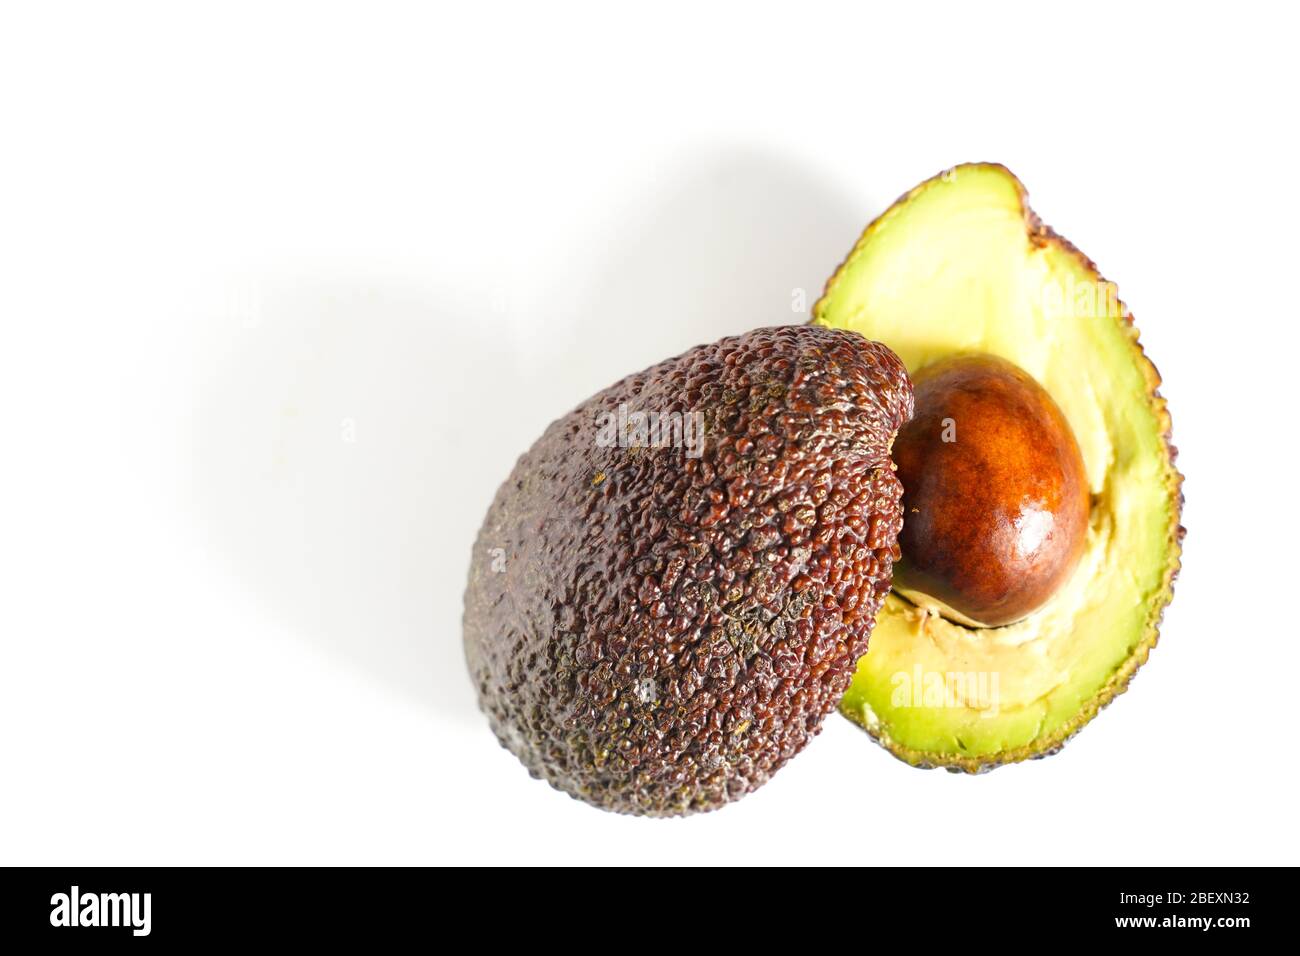 An avocado sliced in half to reveal the core against a plain white background Stock Photo